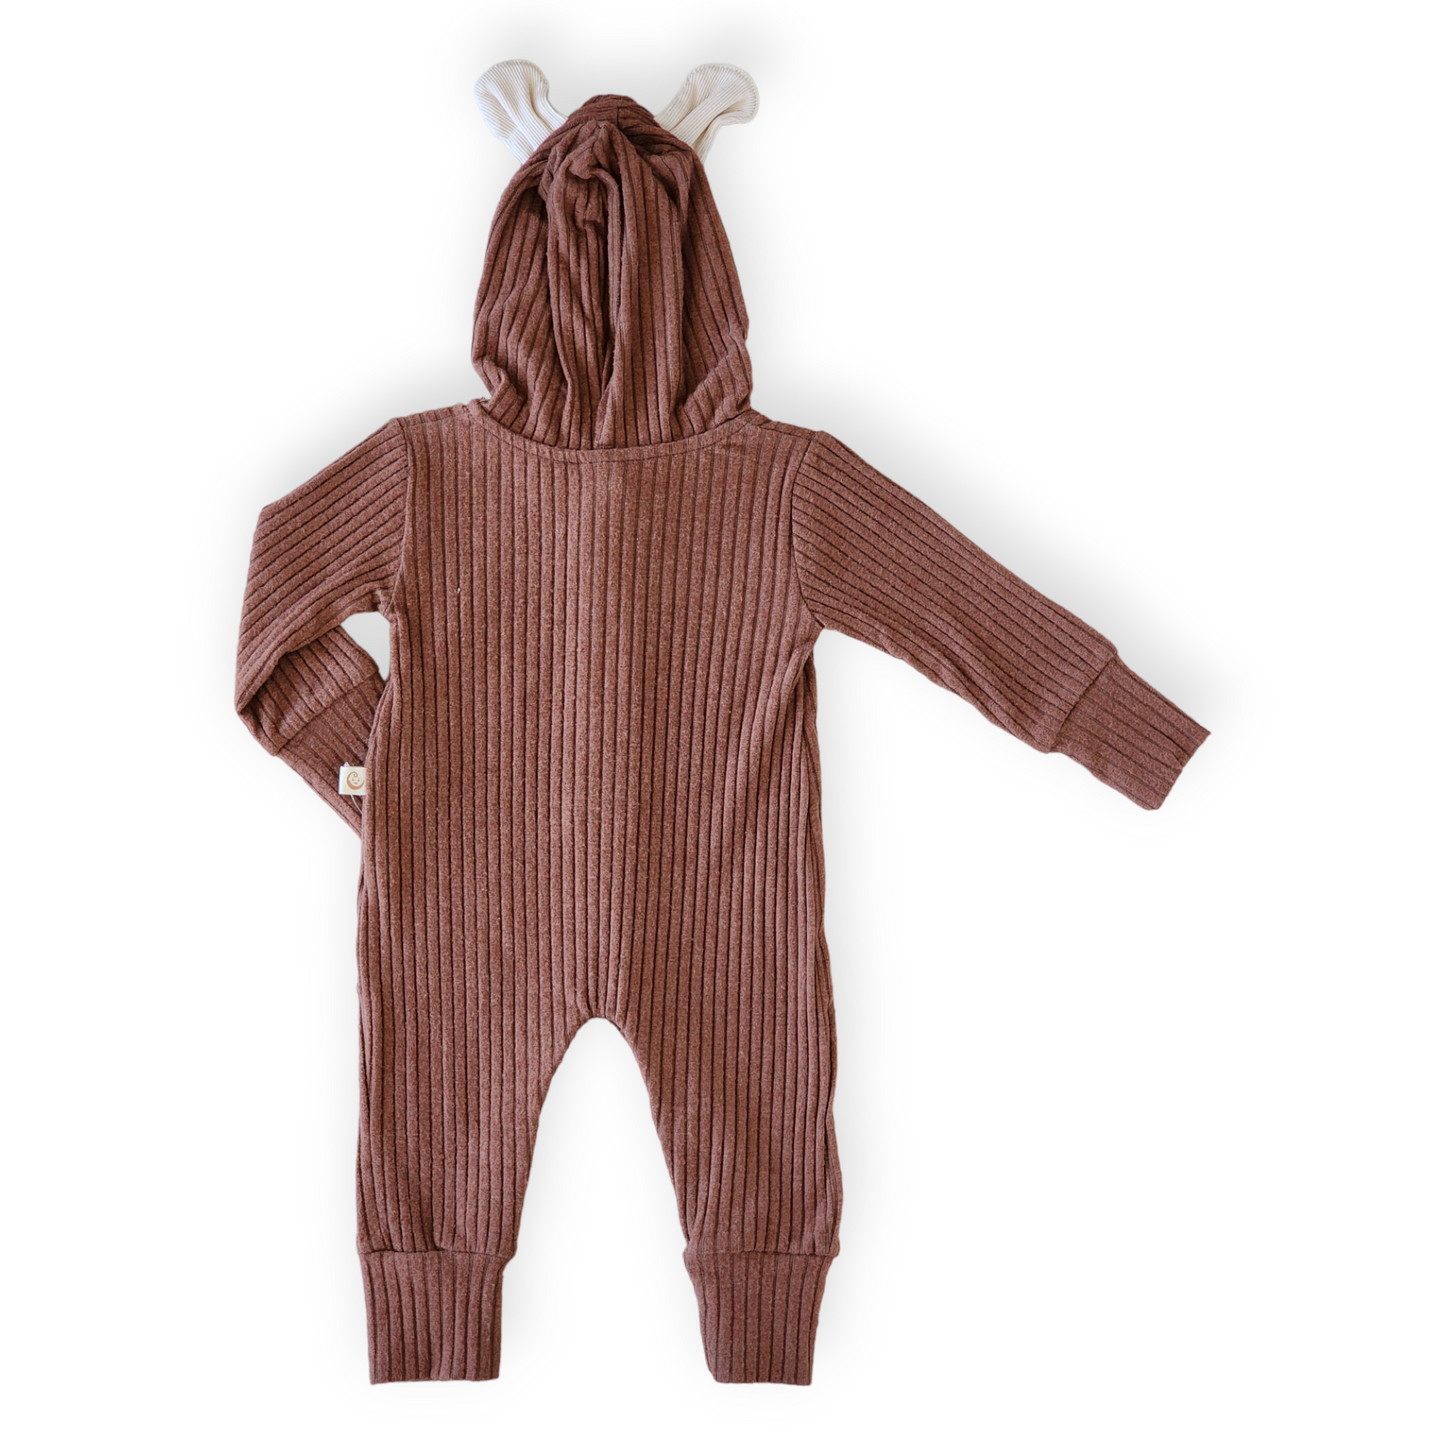 Brown Basic Jumpsuit with Ears on Hoodie-Basic, Boy, Brown, catboy, catgirl, catunisex, Ears, FW23, Girl, Hoodie, Jumpsuit, Long Sleeve, Unfooted, Unisex-Divonette-[Too Twee]-[Tootwee]-[baby]-[newborn]-[clothes]-[essentials]-[toys]-[Lebanon]